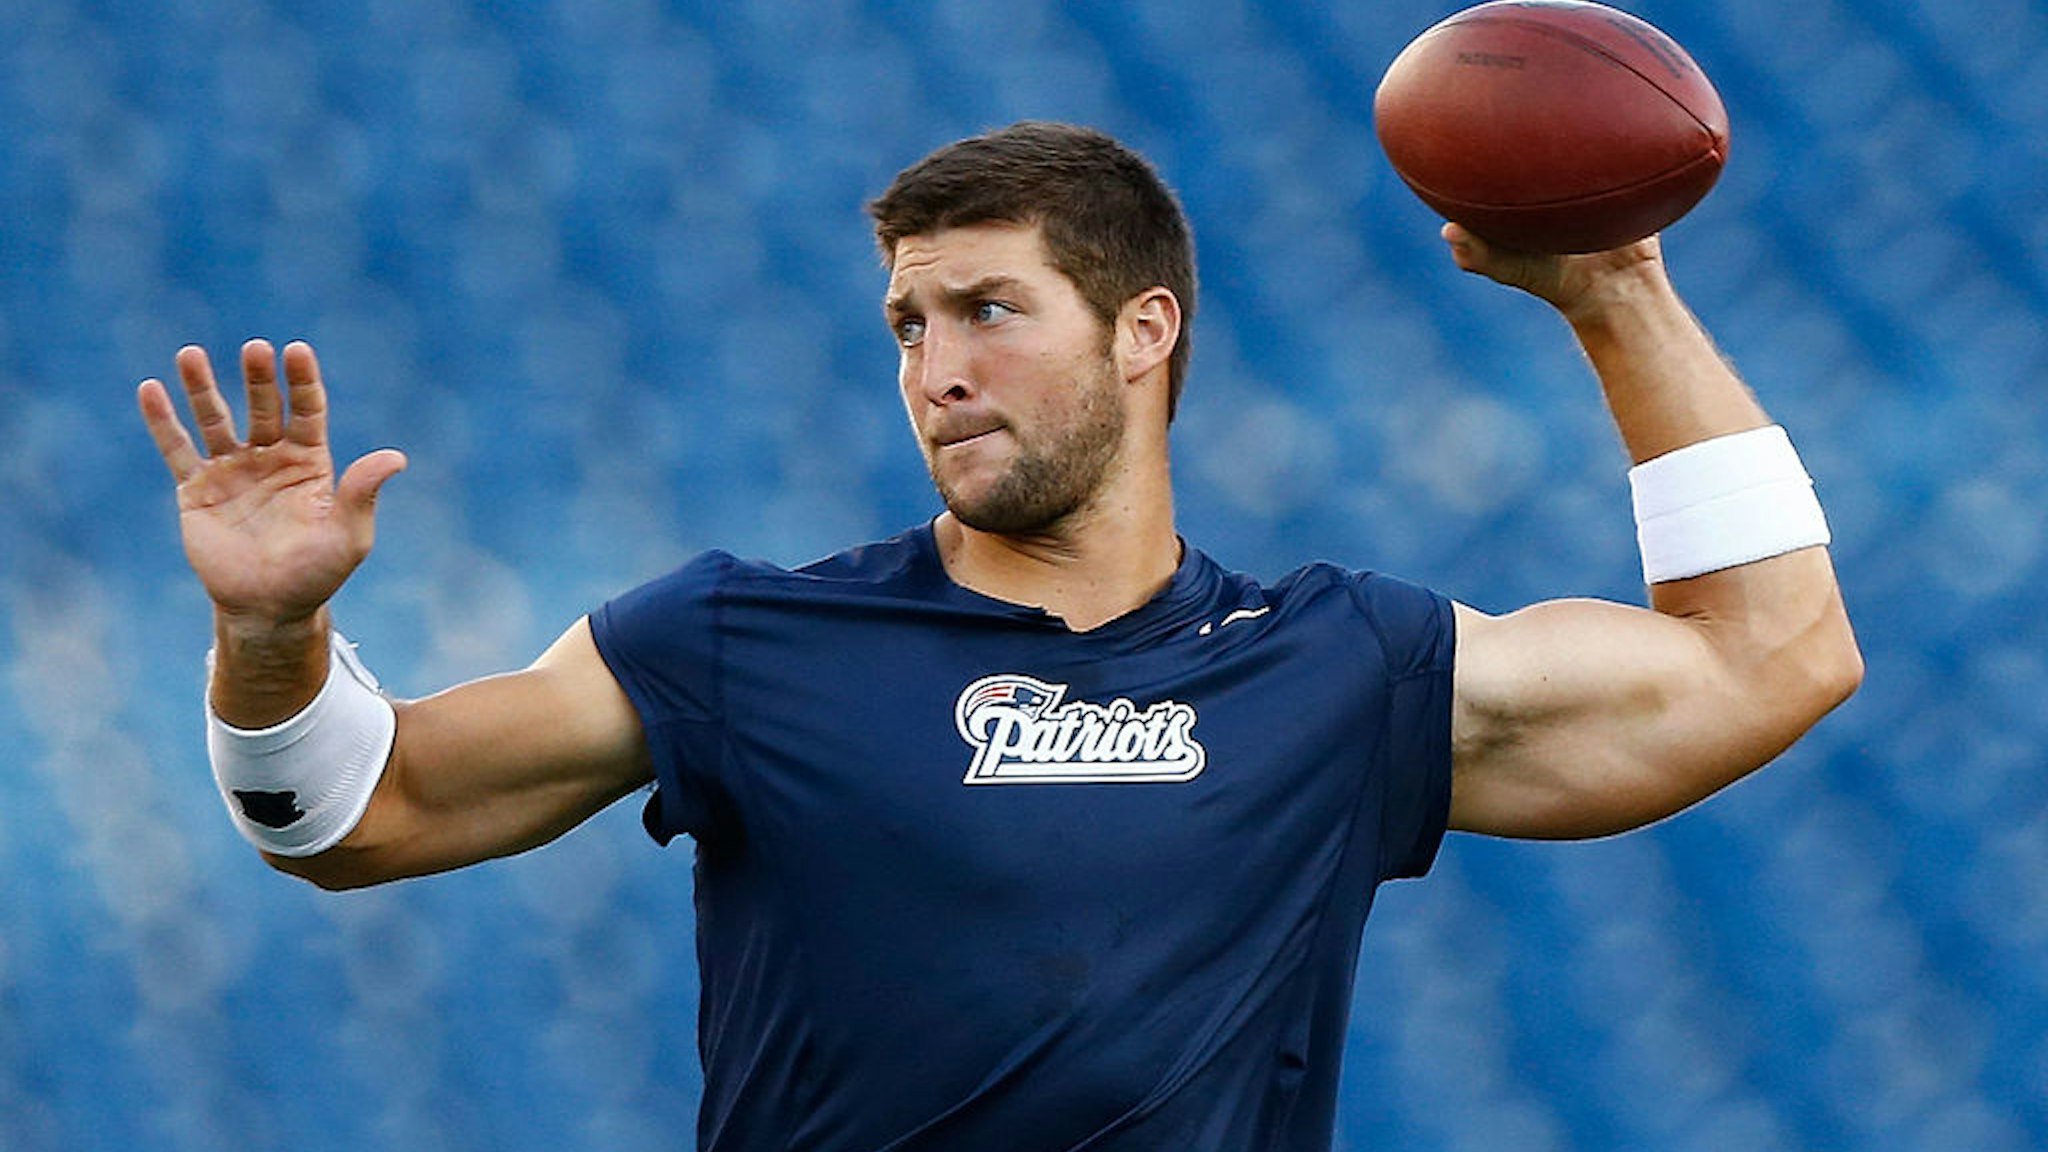 FOXBORO, MA - AUGUST 16: Tim Tebow #5 of the New England Patriots warms up prior to the game against the Tampa Bay Buccaneers at Gillette Stadium on August 16, 2013 in Foxboro, Massachusetts. (Photo by Jared Wickerham/Getty Images)